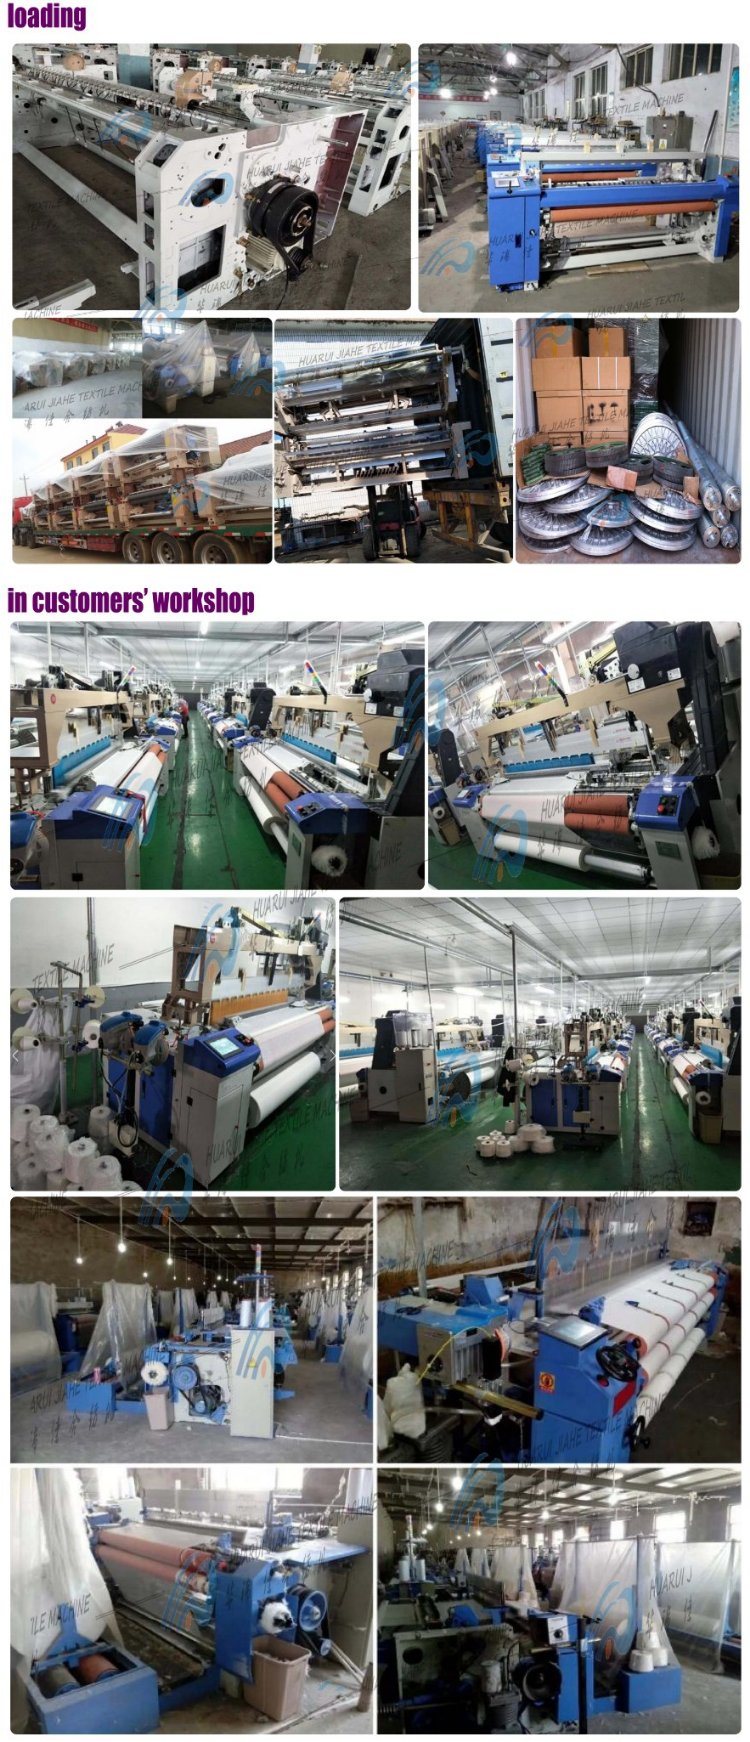 Semi Automatic Weaving Loom, Cams Airjet Loom, Cams Parts Airjet Loom Textile Machinery Loom for Polycotton Fabrics Bedlinen, Polycotton Fabrics